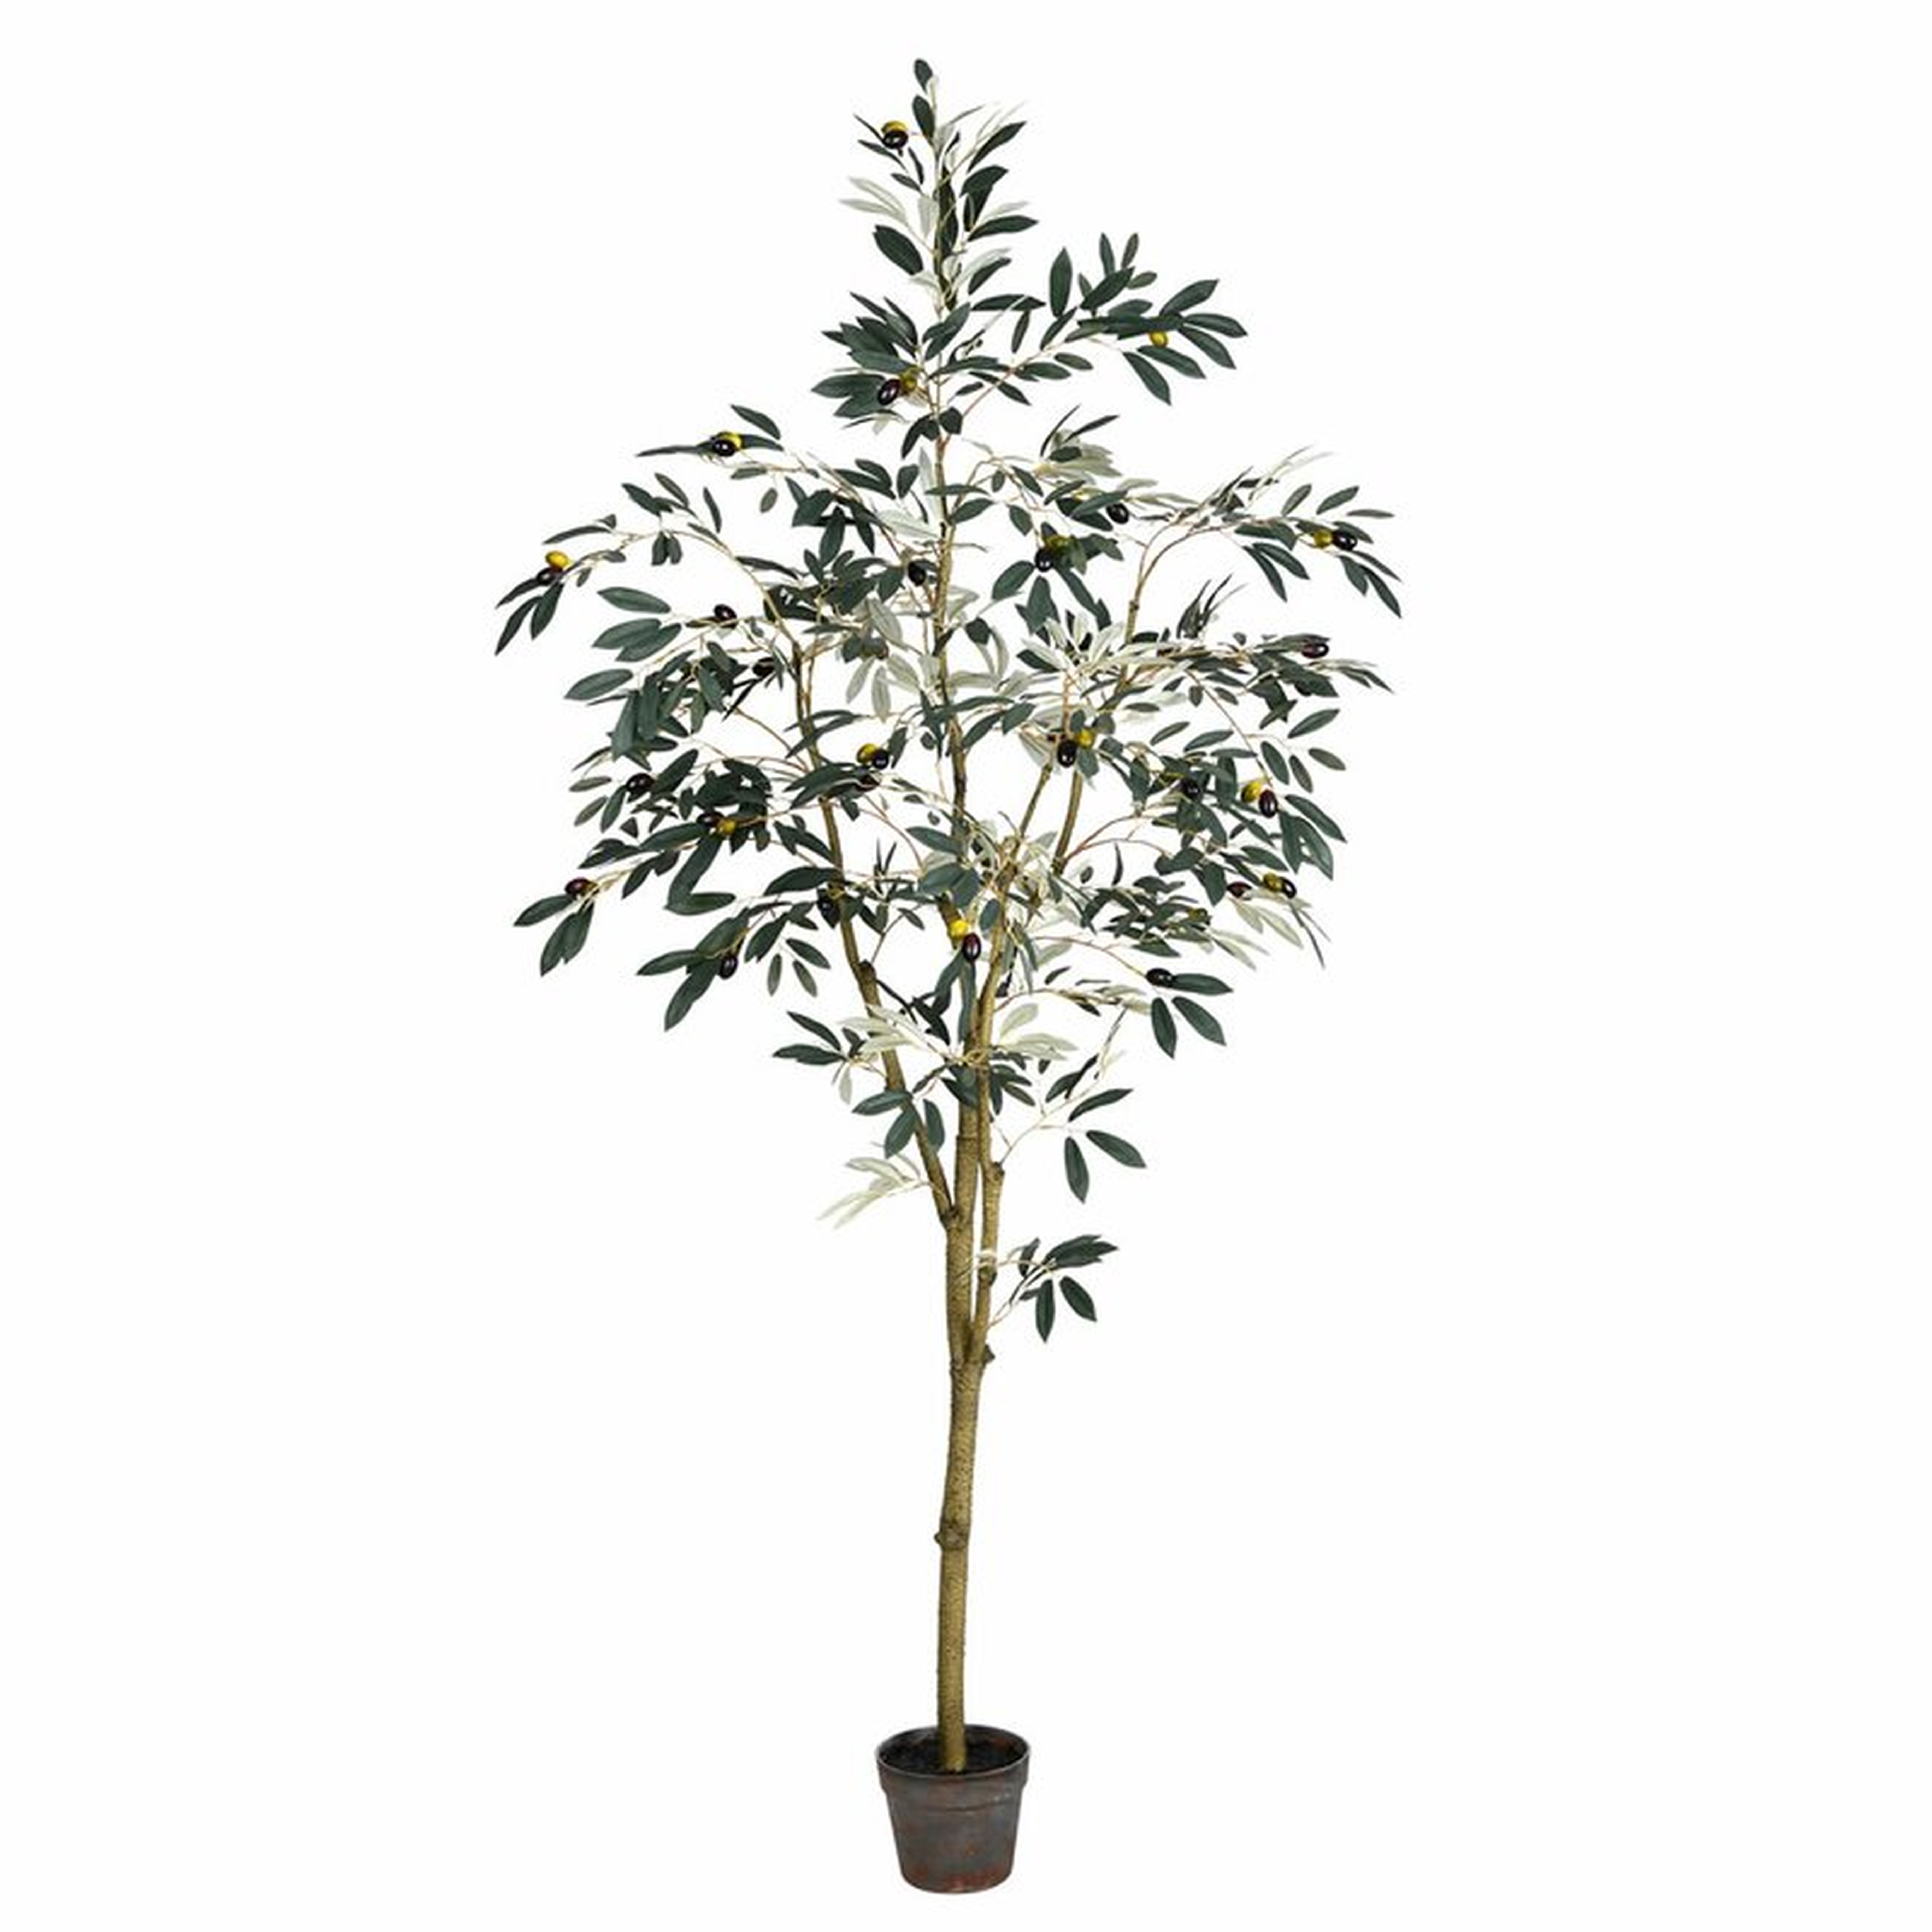 72" Artificial Potted Olive Floor Foliage Tree in Pot - Wayfair